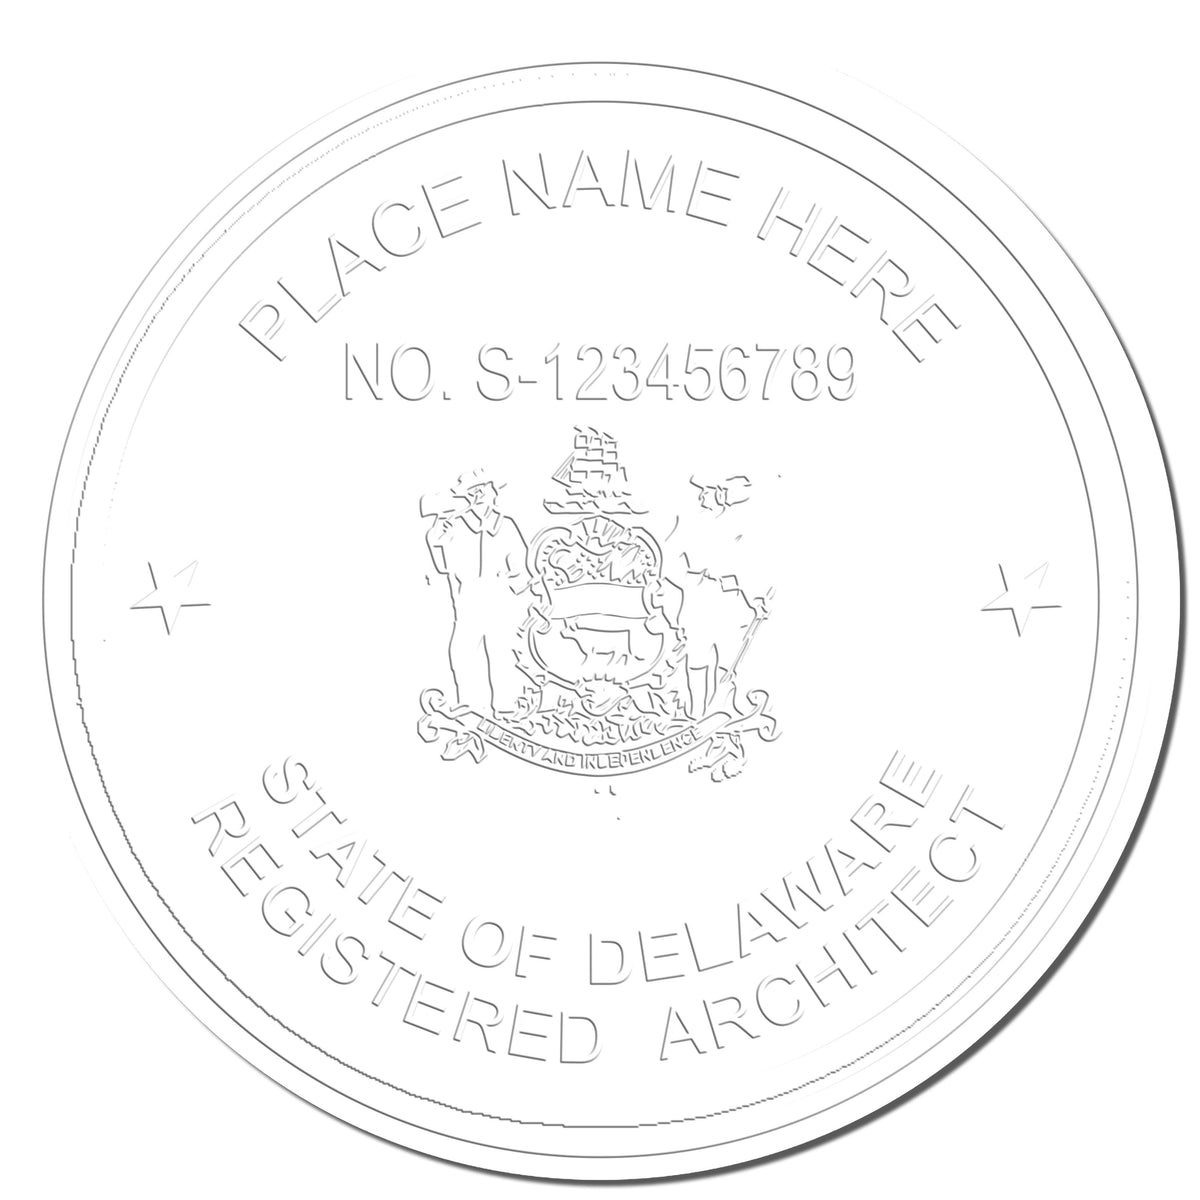 A photograph of the Handheld Delaware Architect Seal Embosser stamp impression reveals a vivid, professional image of the on paper.